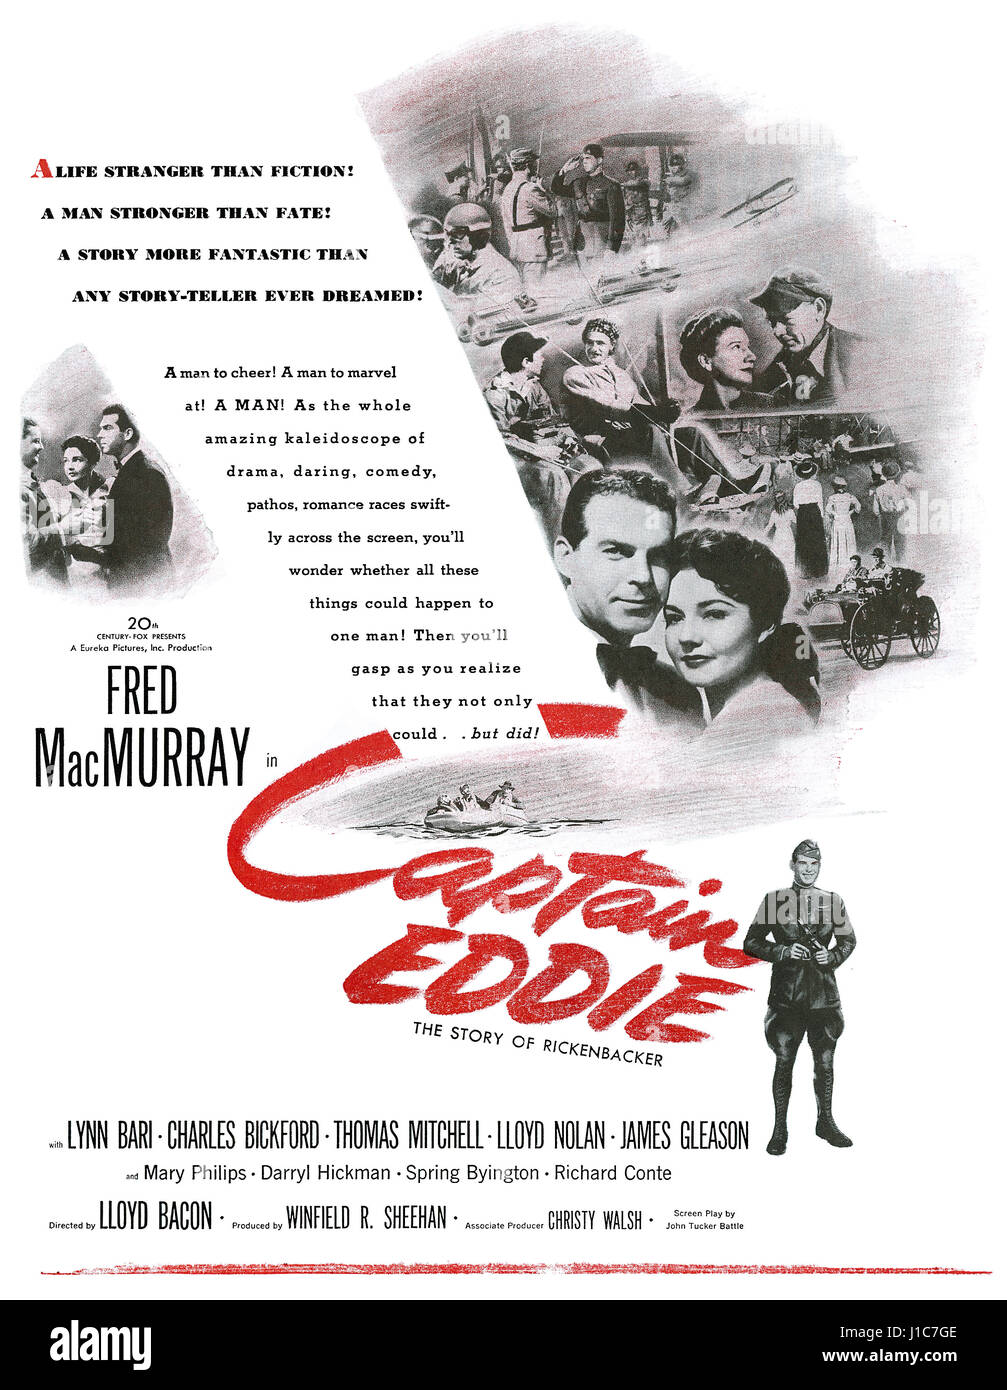 1945 U.S. advertisement for the film Captain Eddie, starring Fred MacMurray. Stock Photo